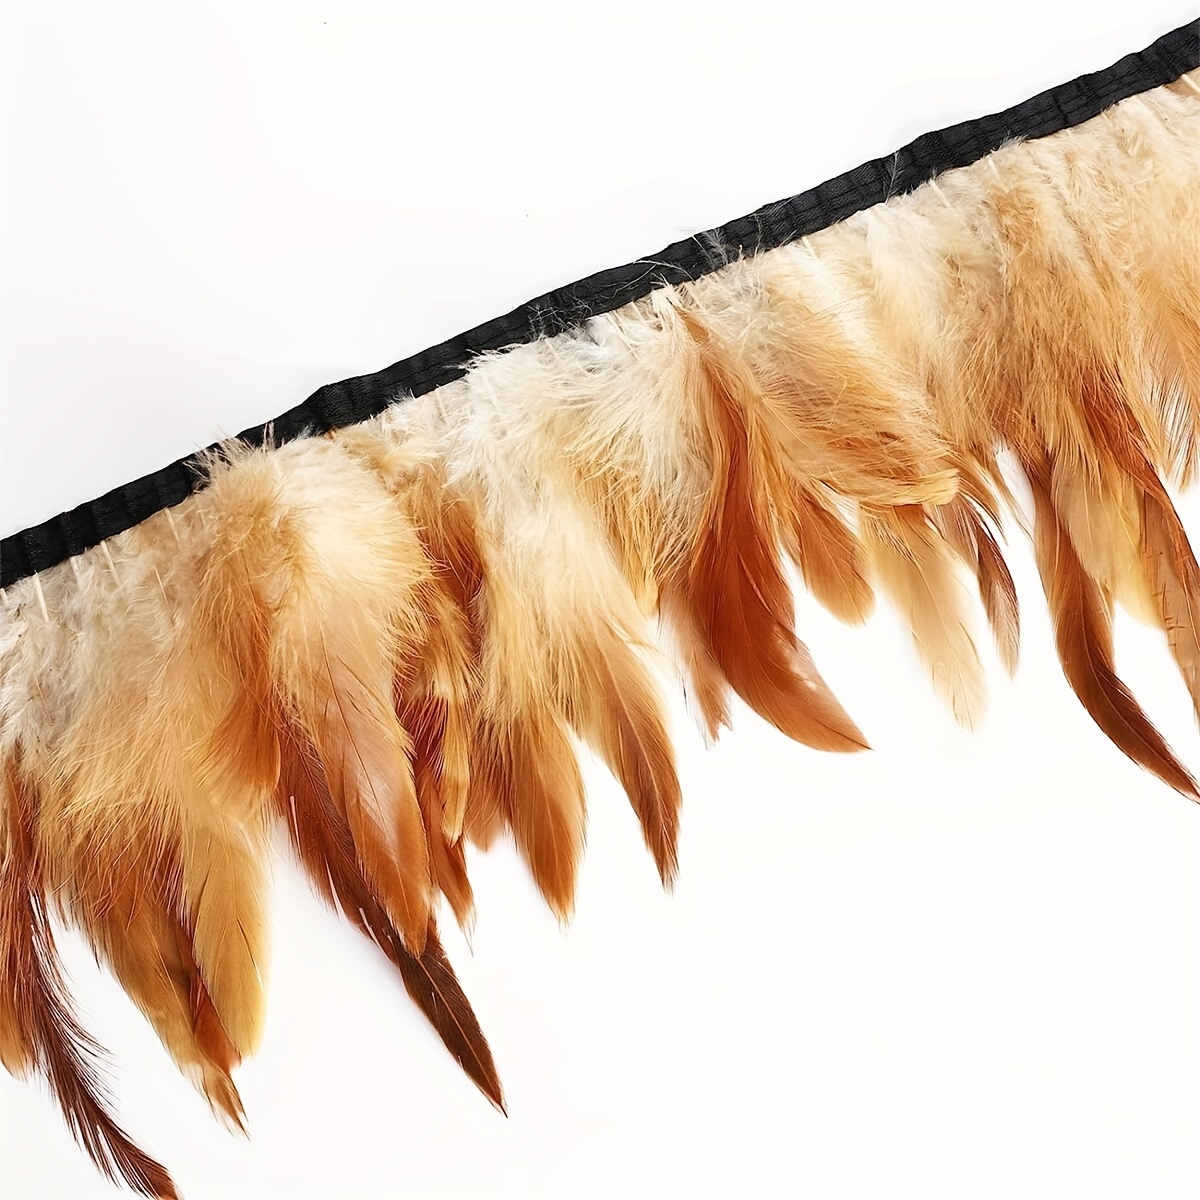 5.5 Yards Length Natural Chicken Rooster Feathers Trims Fringes Plumes  Ribbon DIY Sewing Clothing Wedding Decoration Clothing (1 M*5)